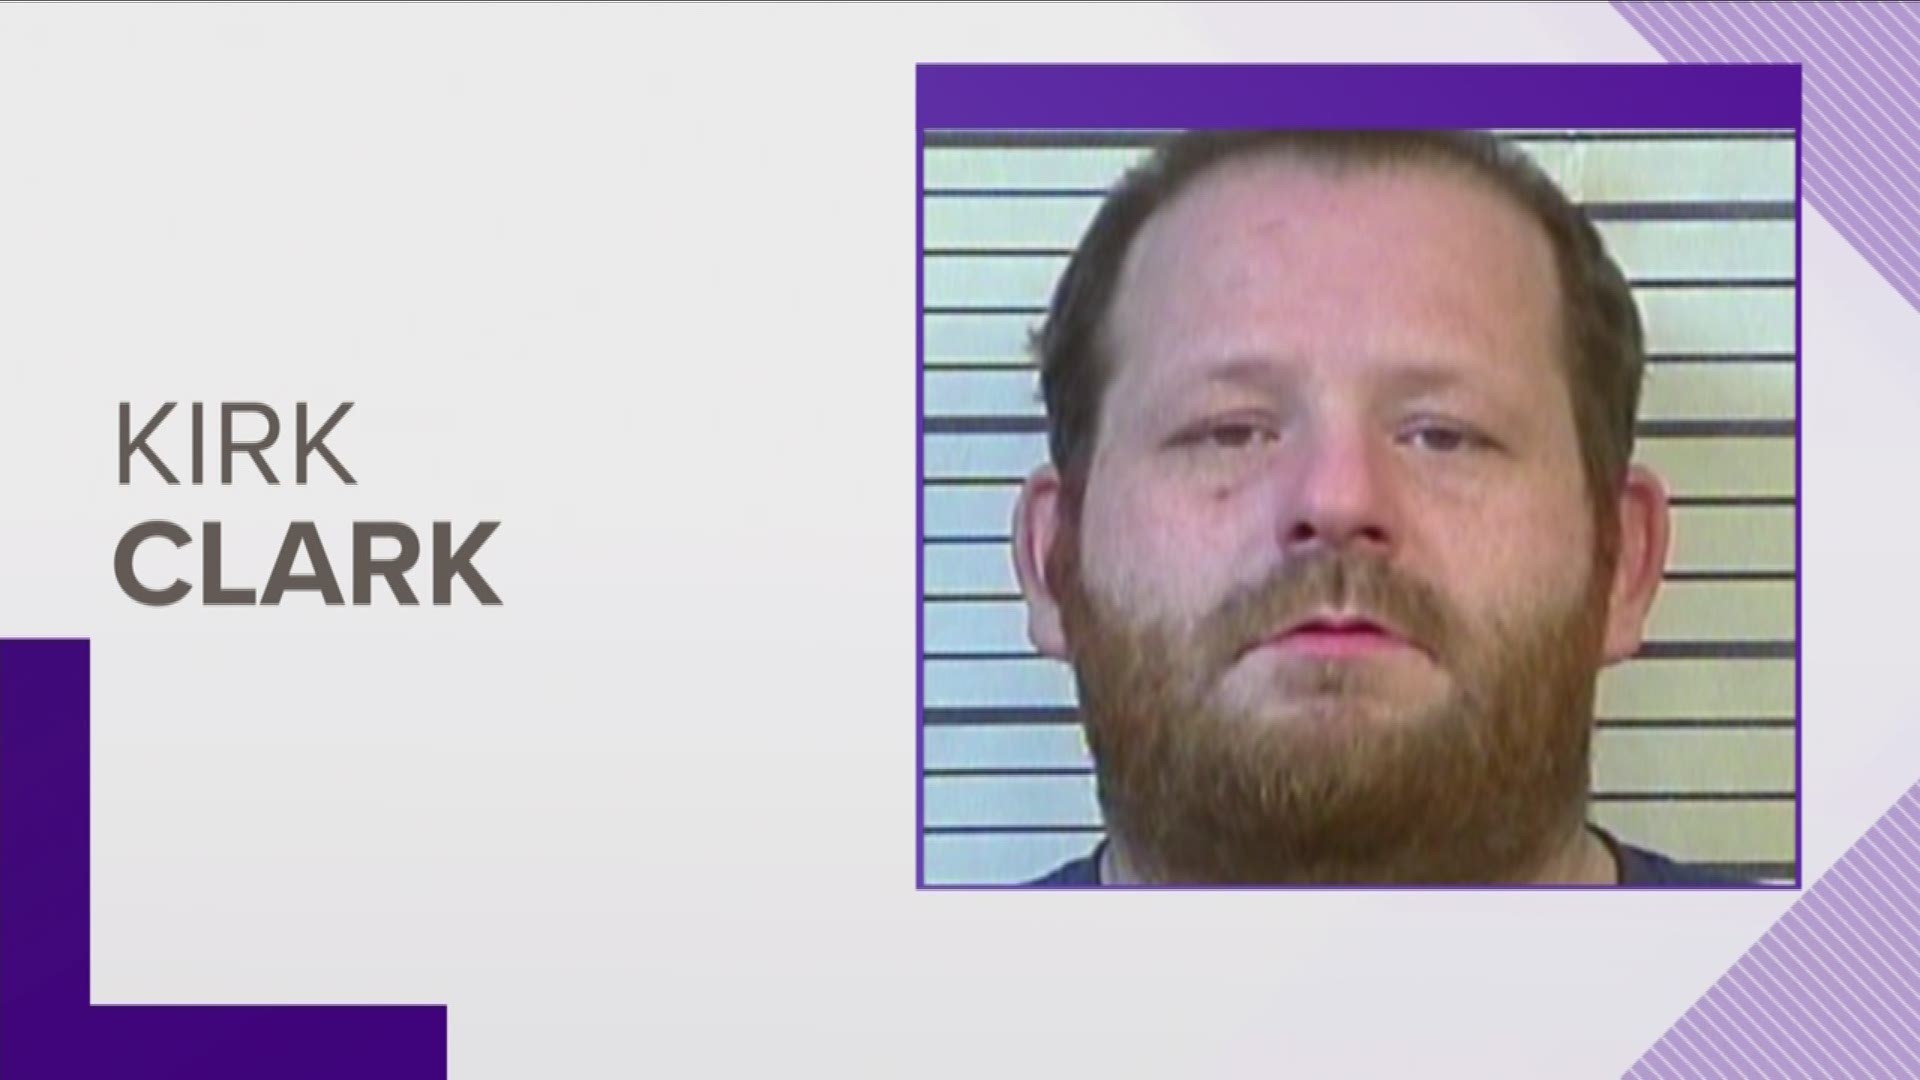 Kirk Douglas Clark, 35, was arrested during a traffic stop by the Tennessee Highway Patrol early Tuesday morning. He's charged with first degree murder.